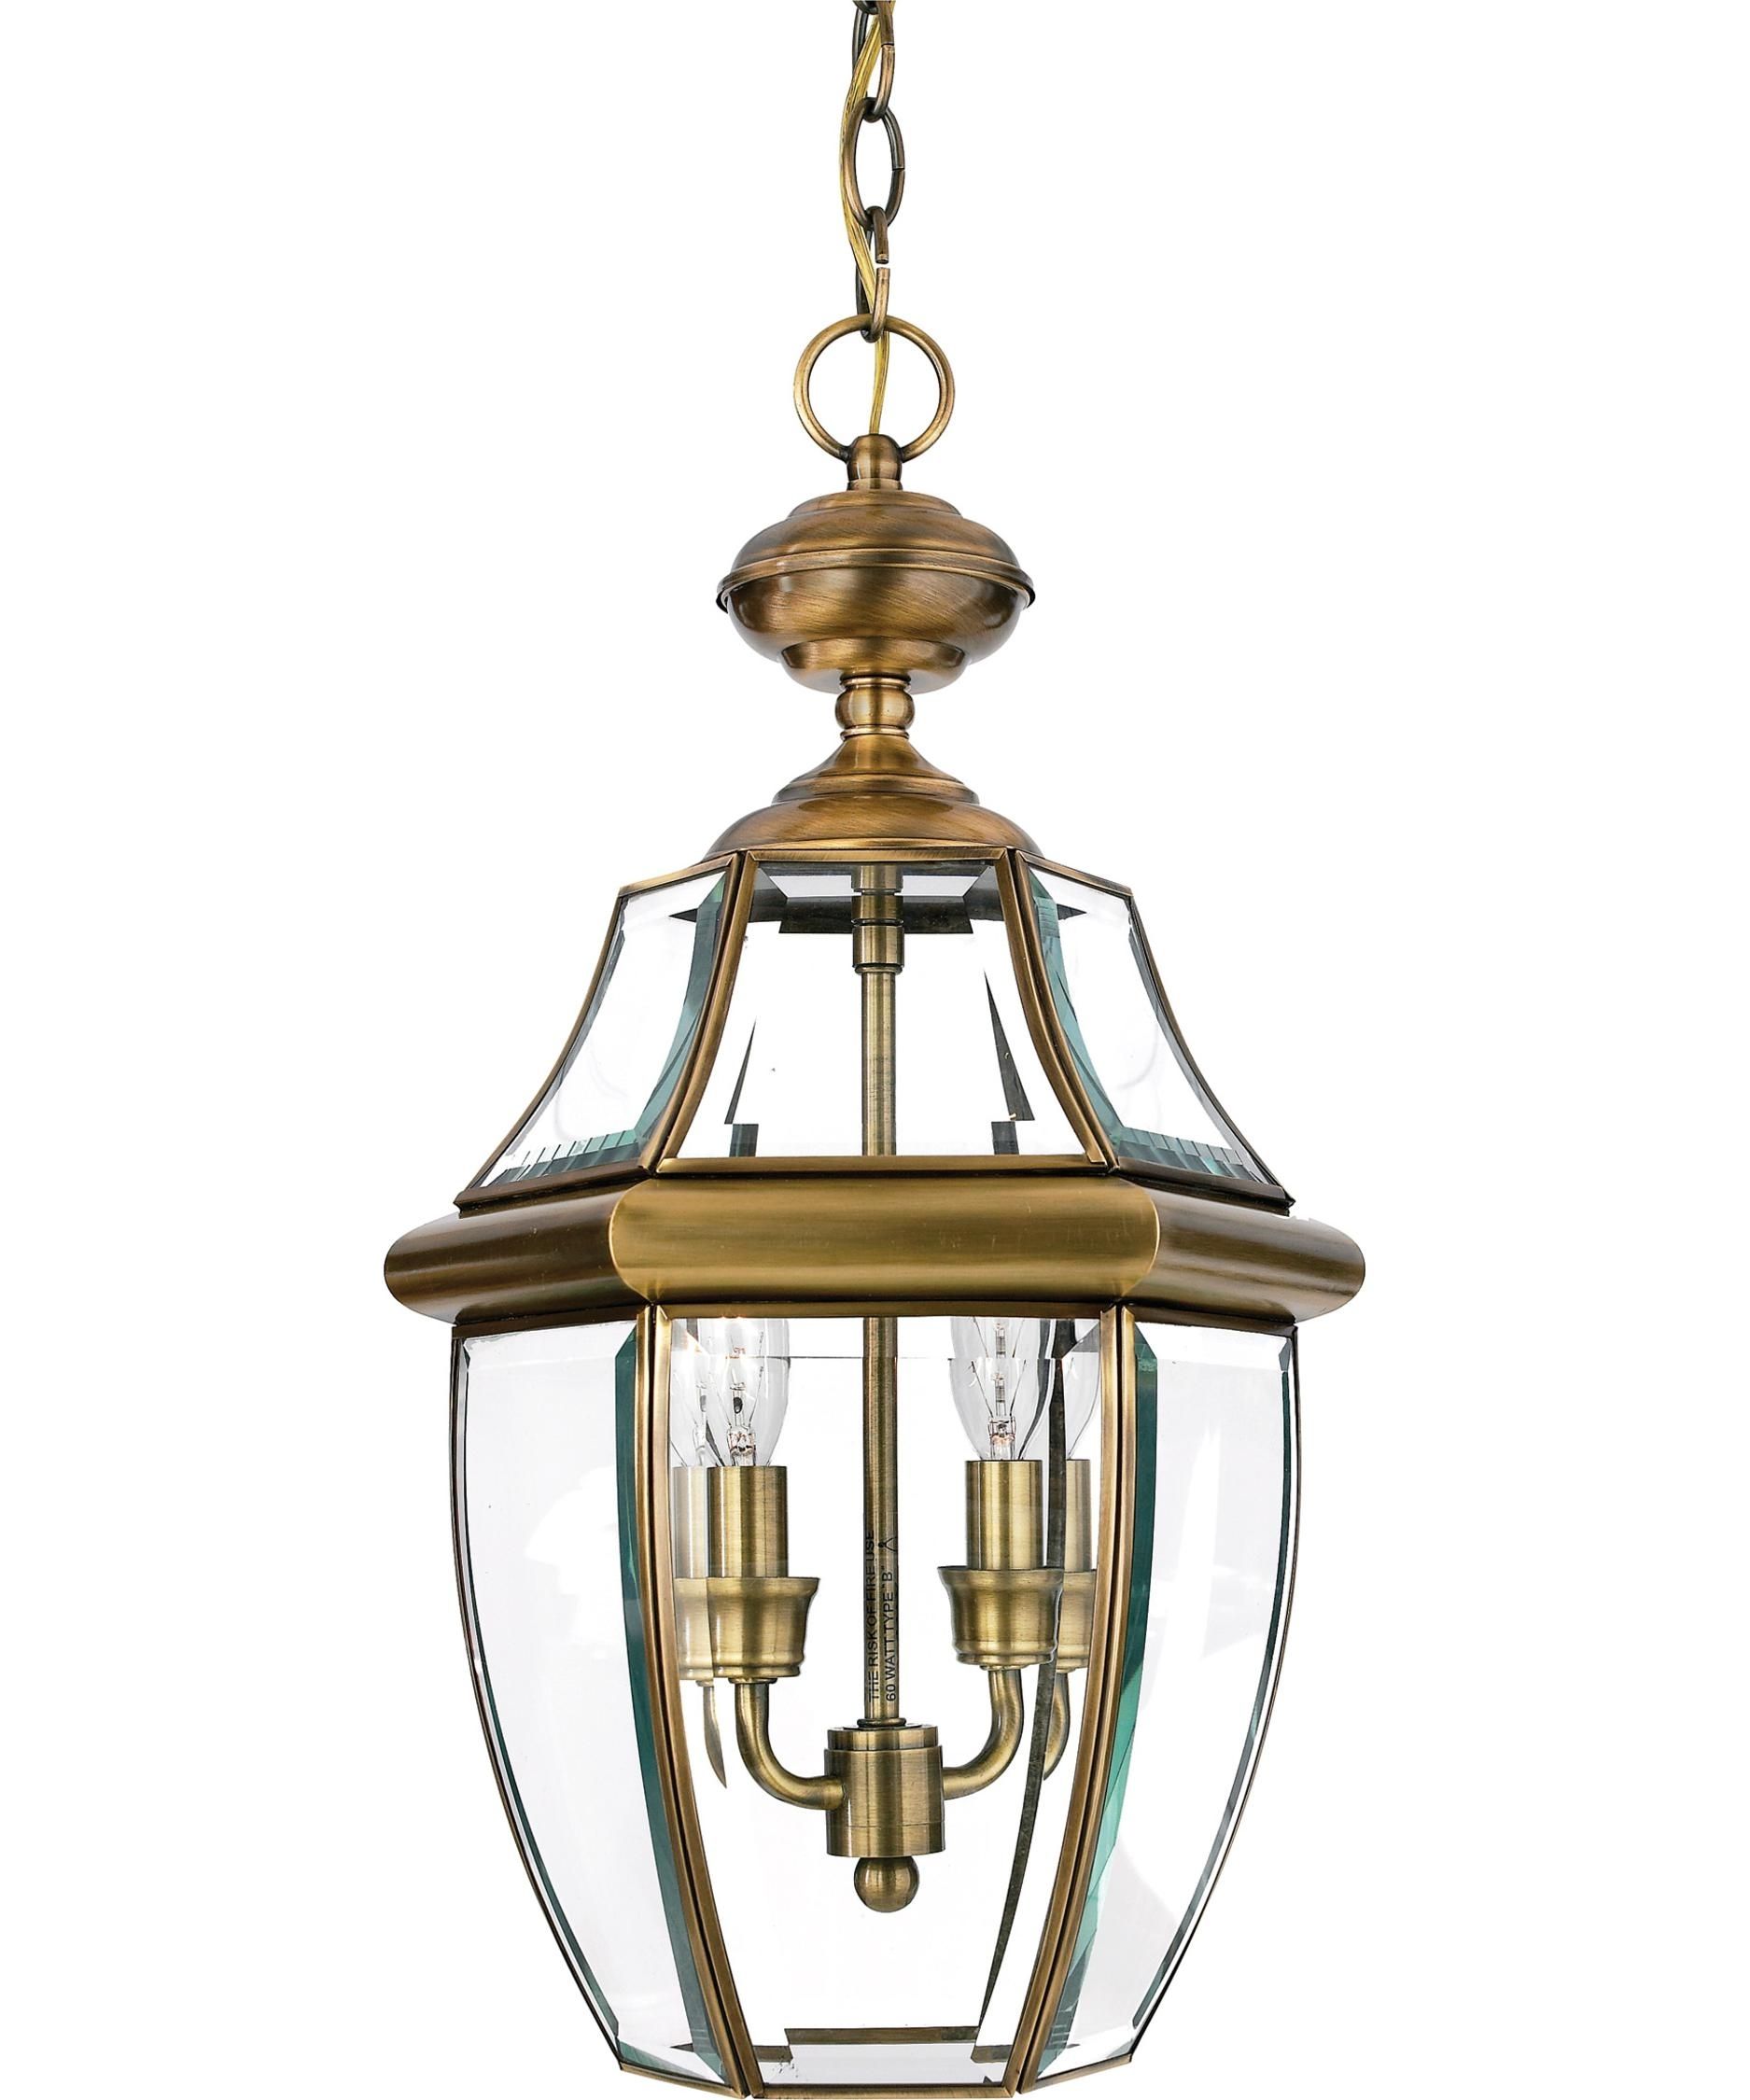 Quoizel Ny1178 Newbury 10 Inch Wide 2 Light Outdoor Hanging Lantern Regarding Quoizel Outdoor Hanging Lights (Photo 5 of 15)